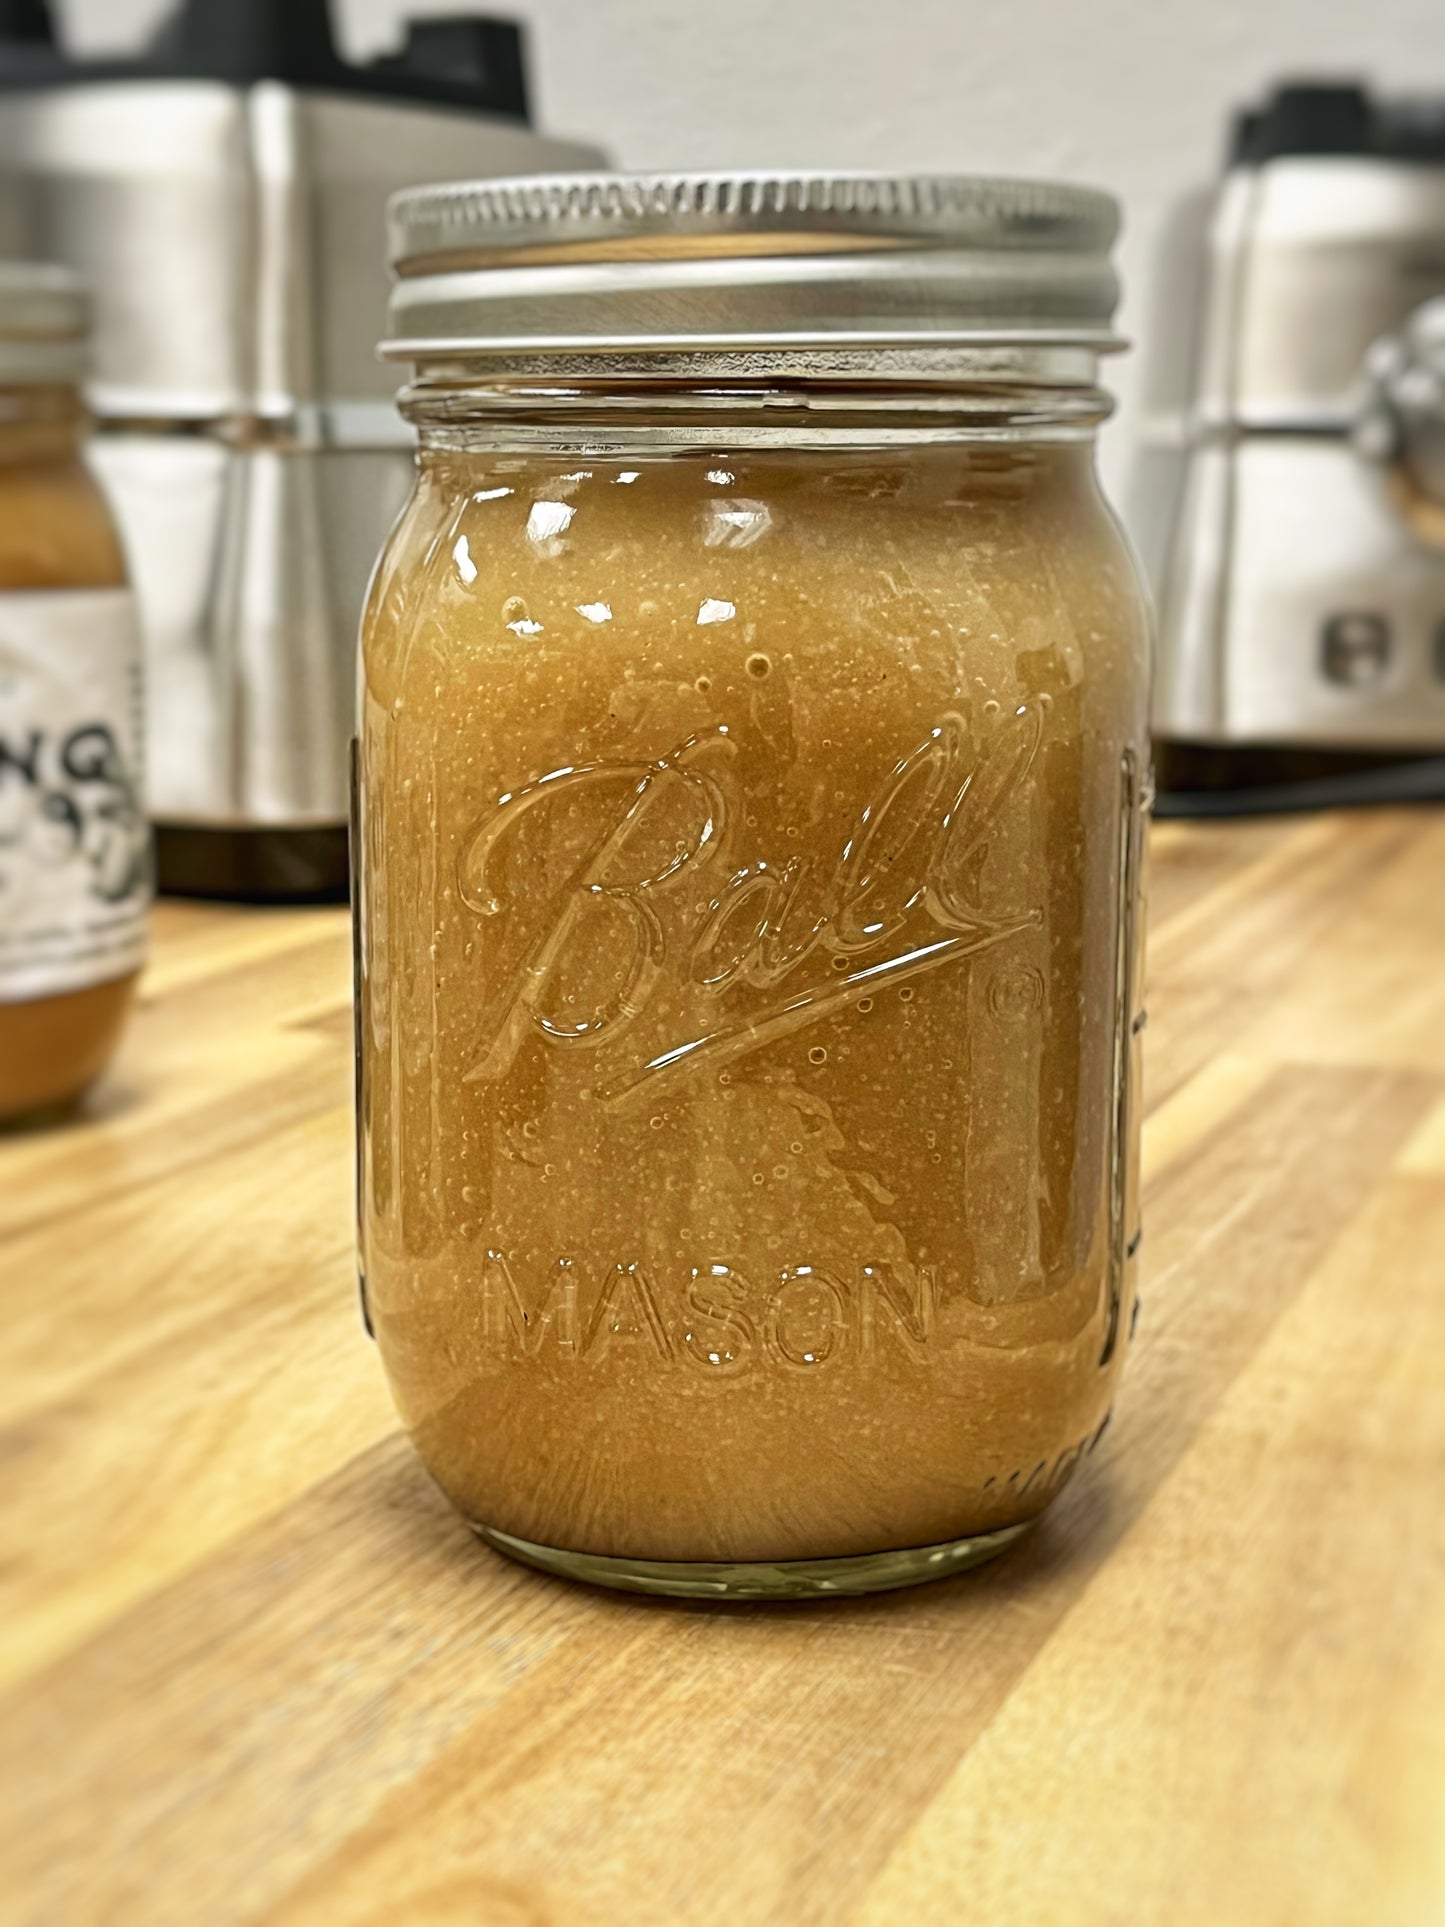 Red Maca Root Sea Moss Gel | Yin for Her | Wildcrafted